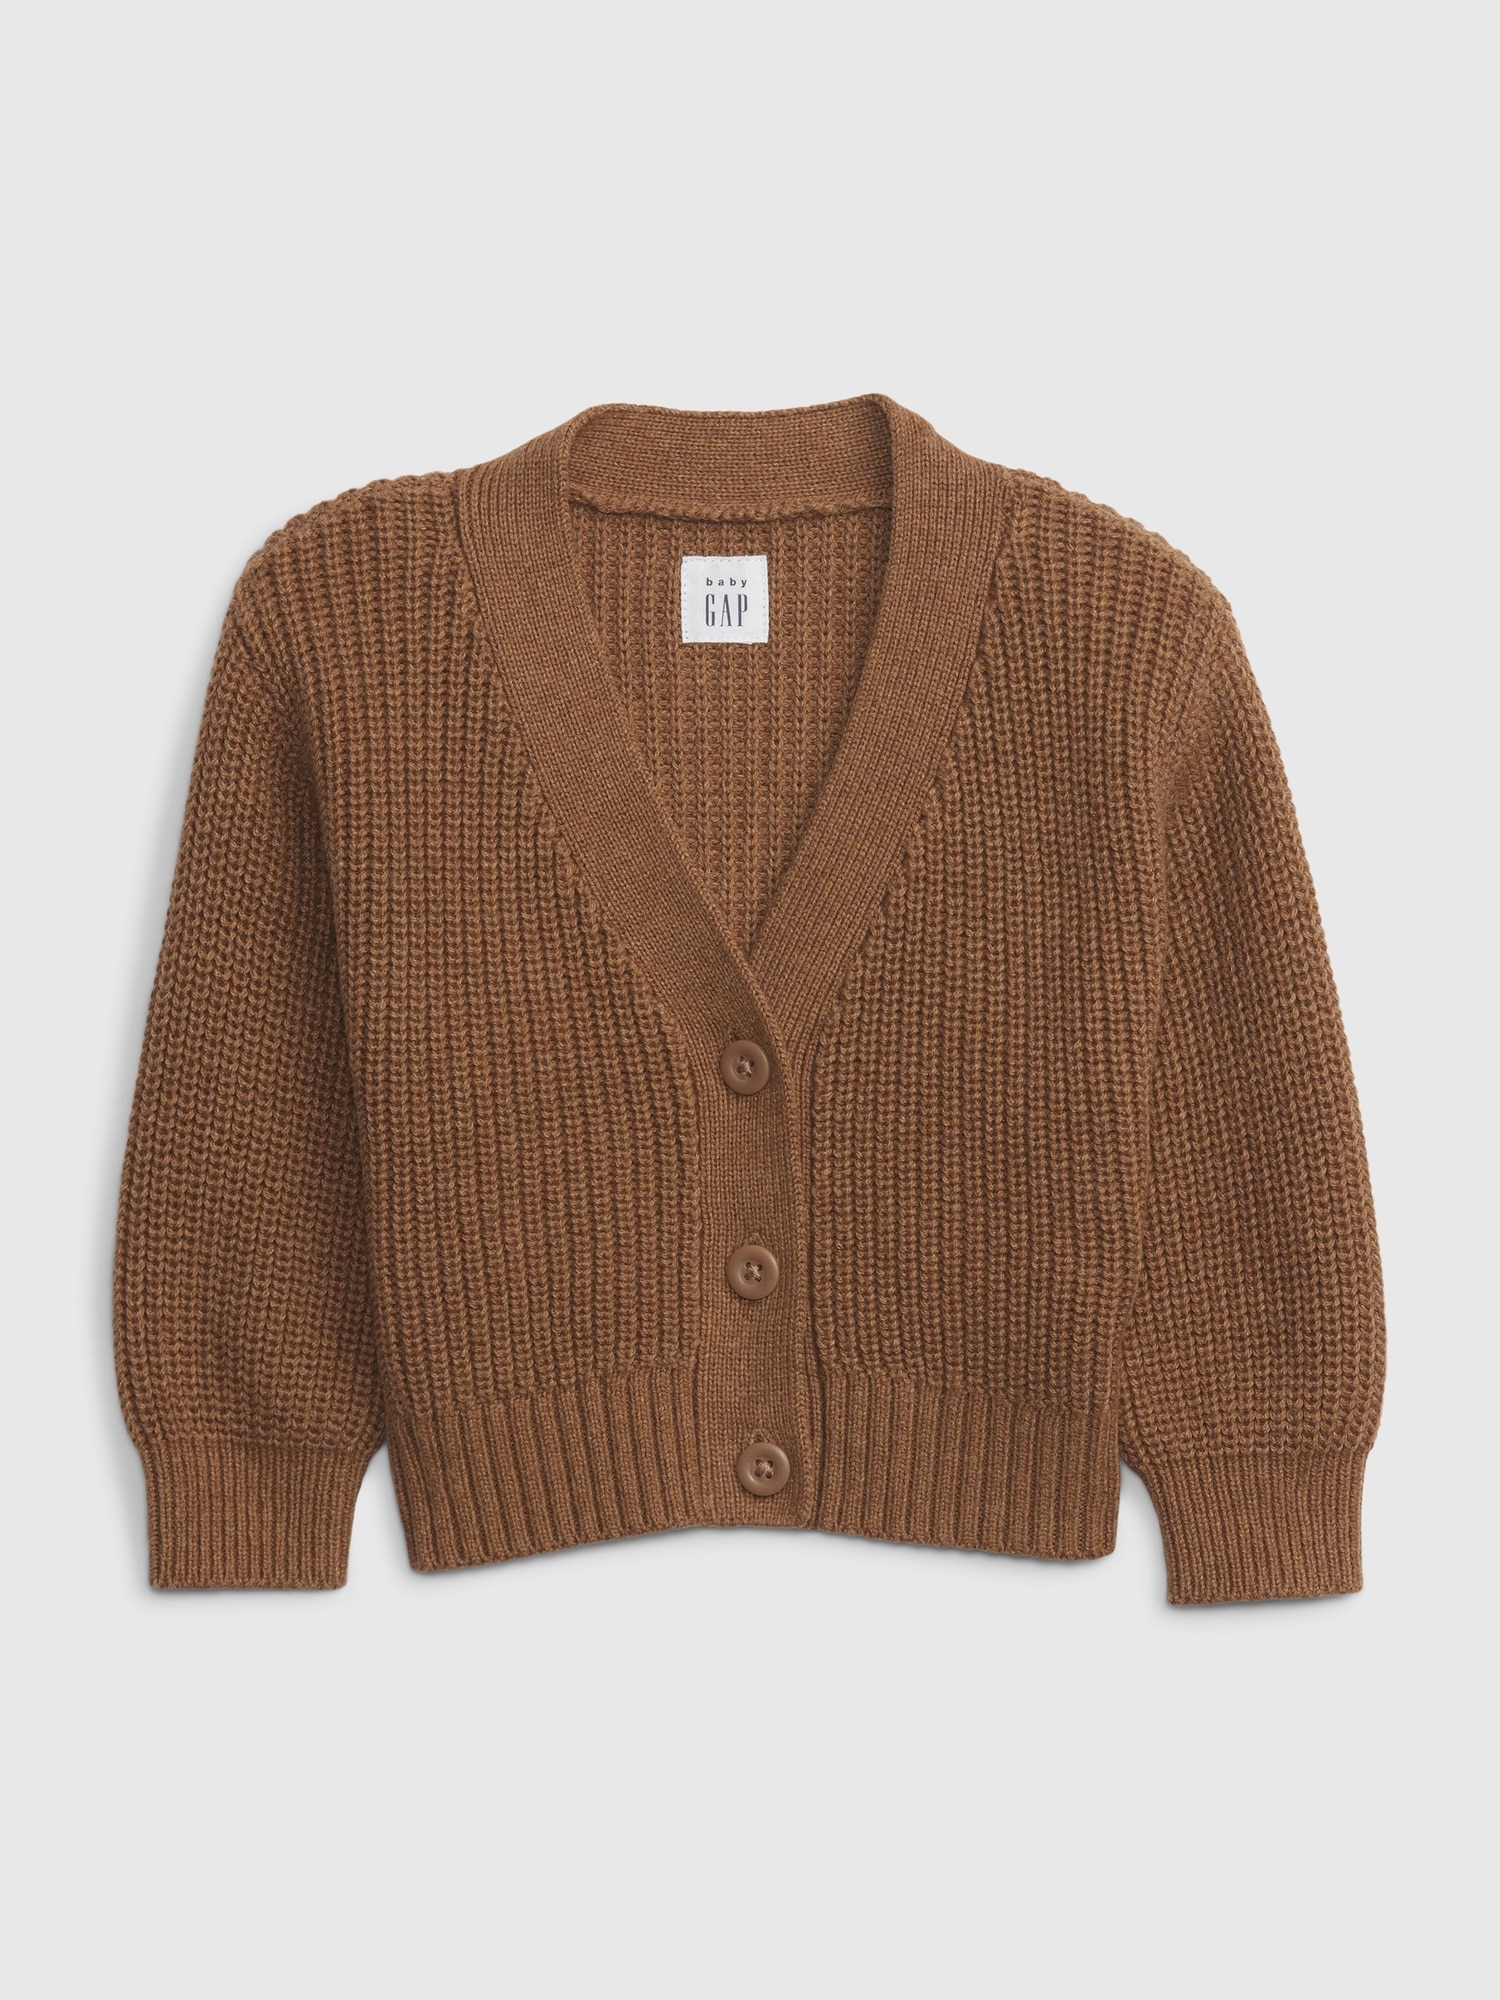 Gap Baby Shaker-stitch Cardigan In Holiday Brown